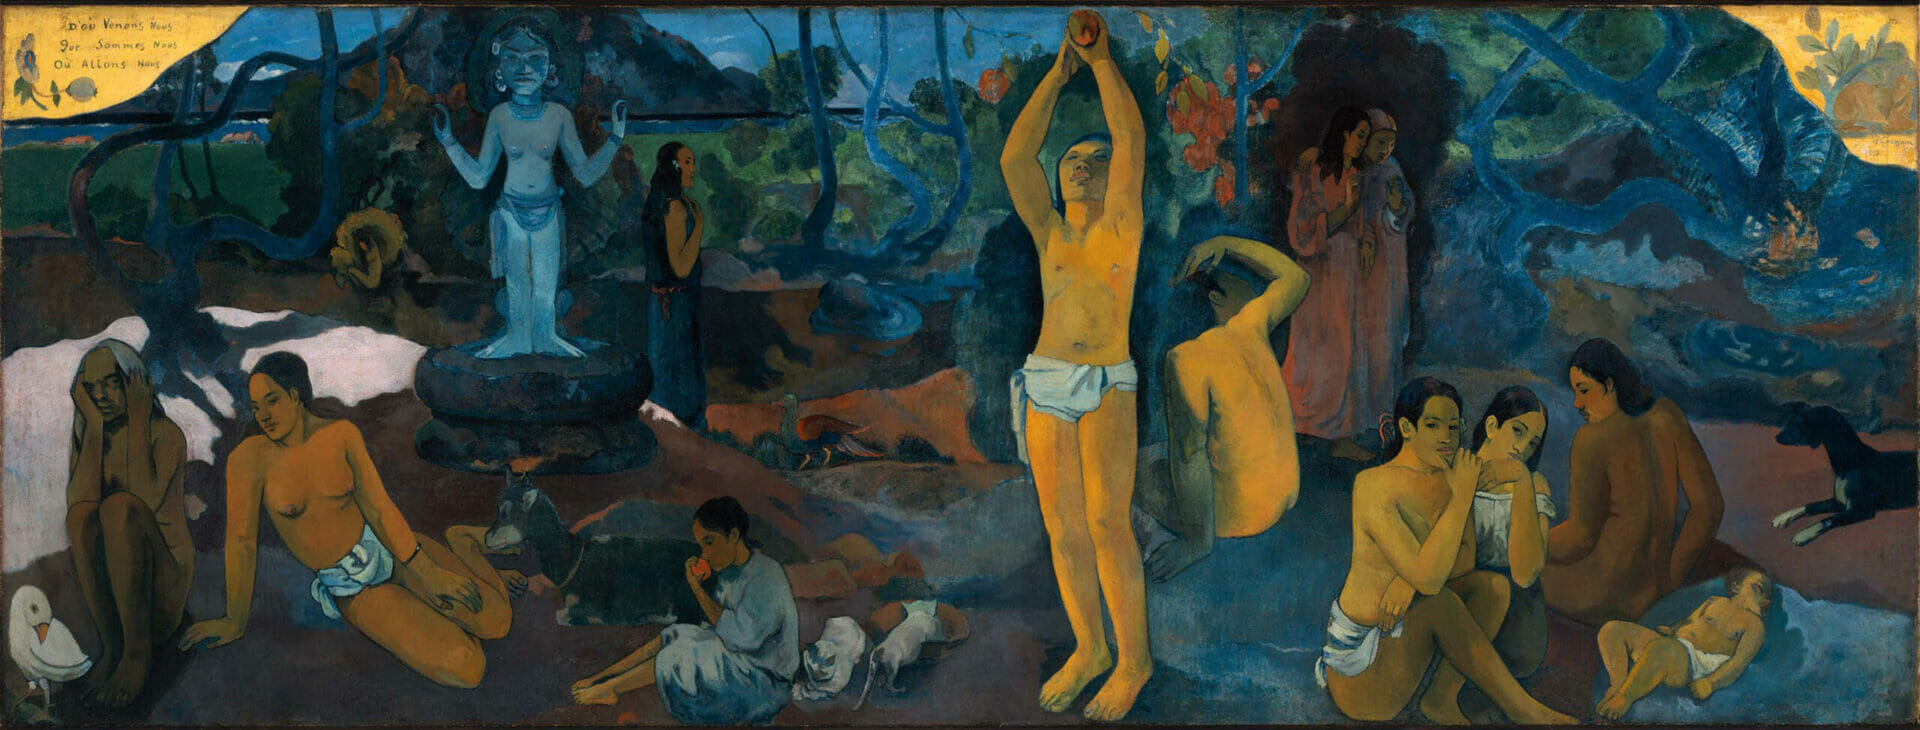 Painting by Gauguin 